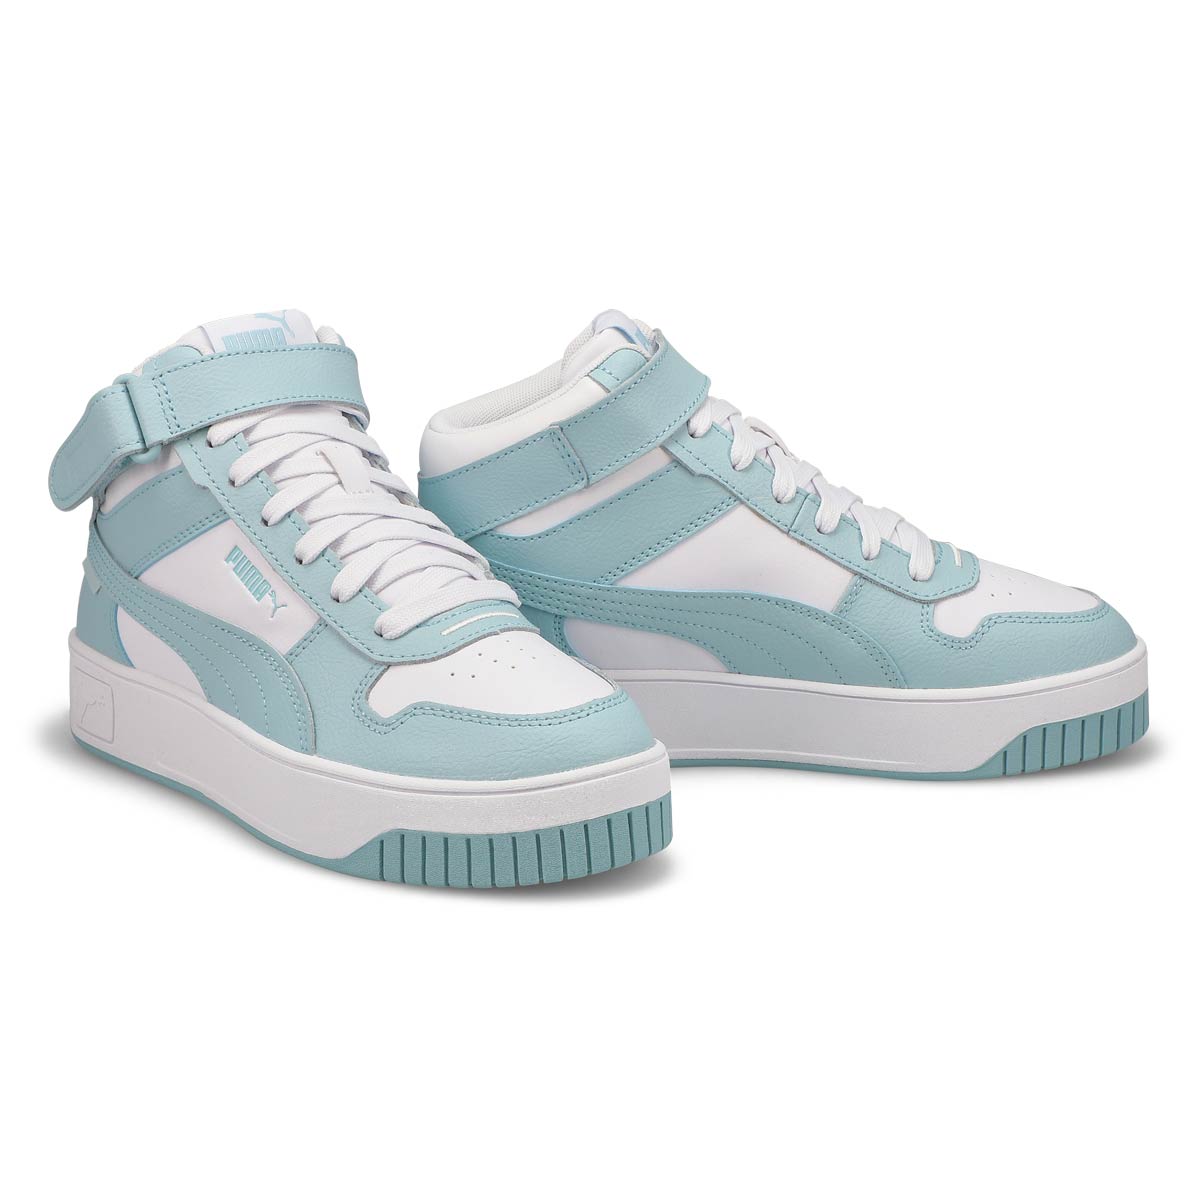 Womens Carina Street Mid Lace Up Sneaker- White/Turquoise